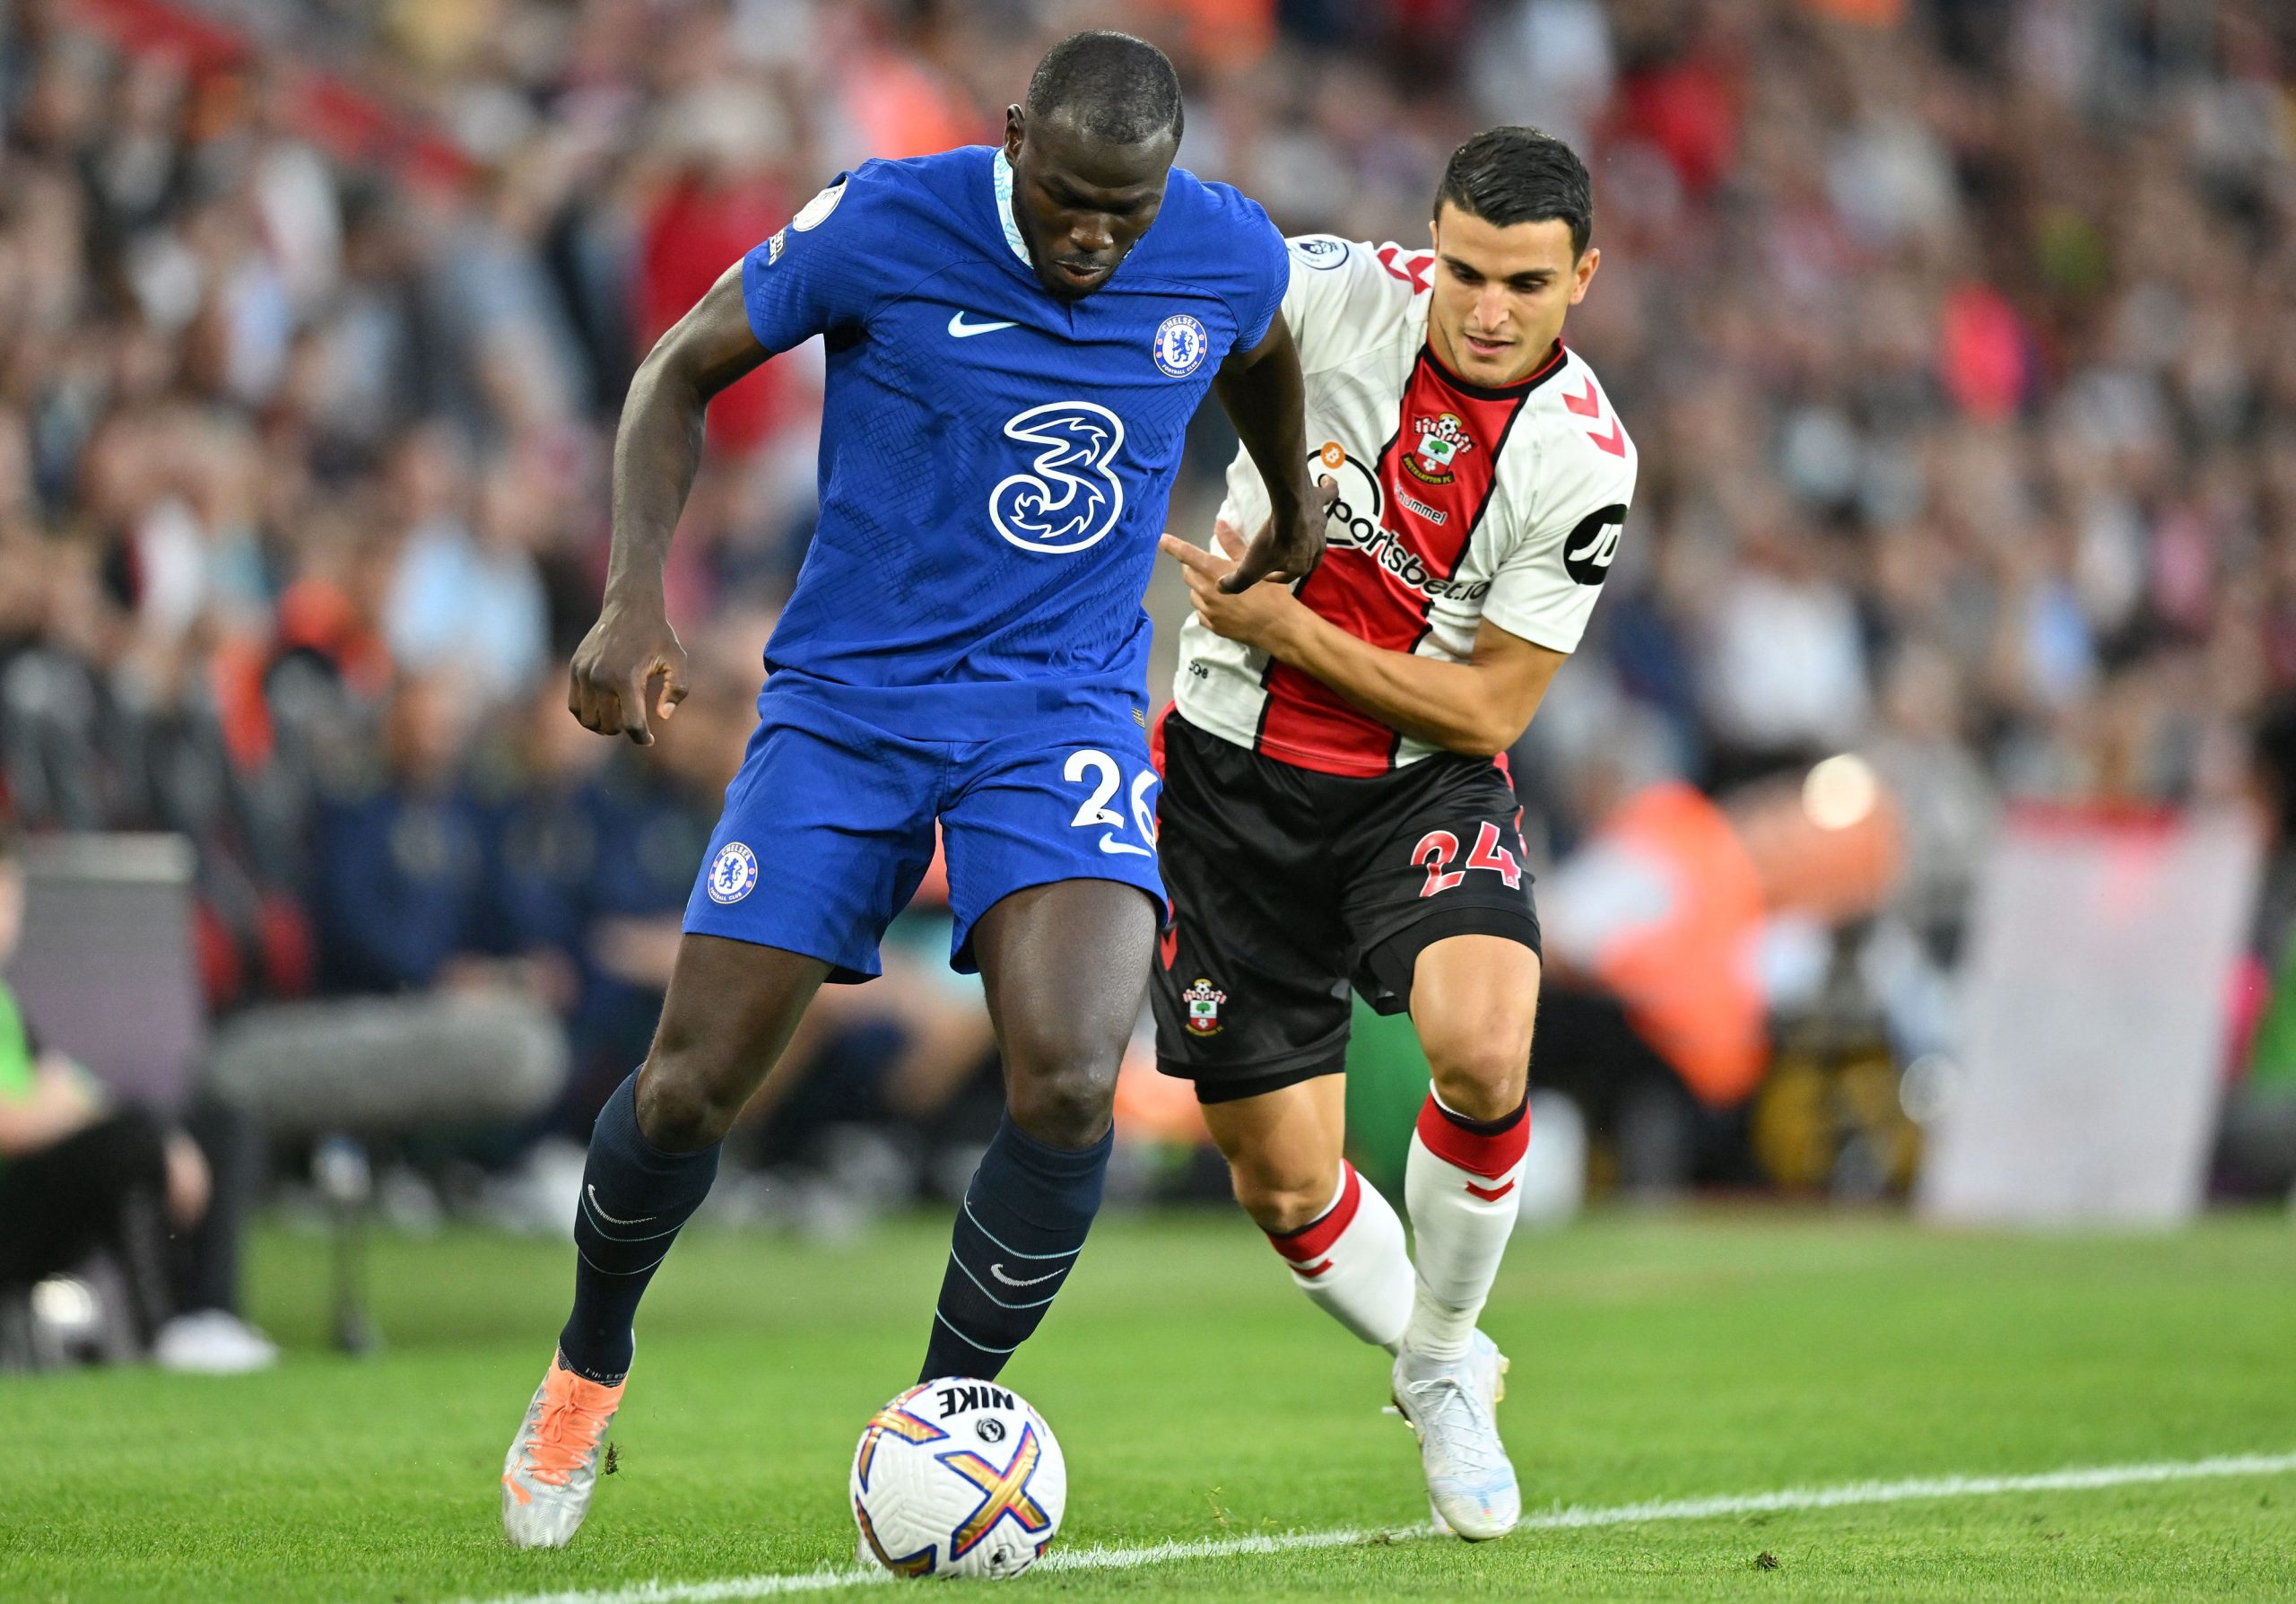 Mohamed Elyounoussi vies for possession with Chelsea defender, Kalidou Koulibaly.